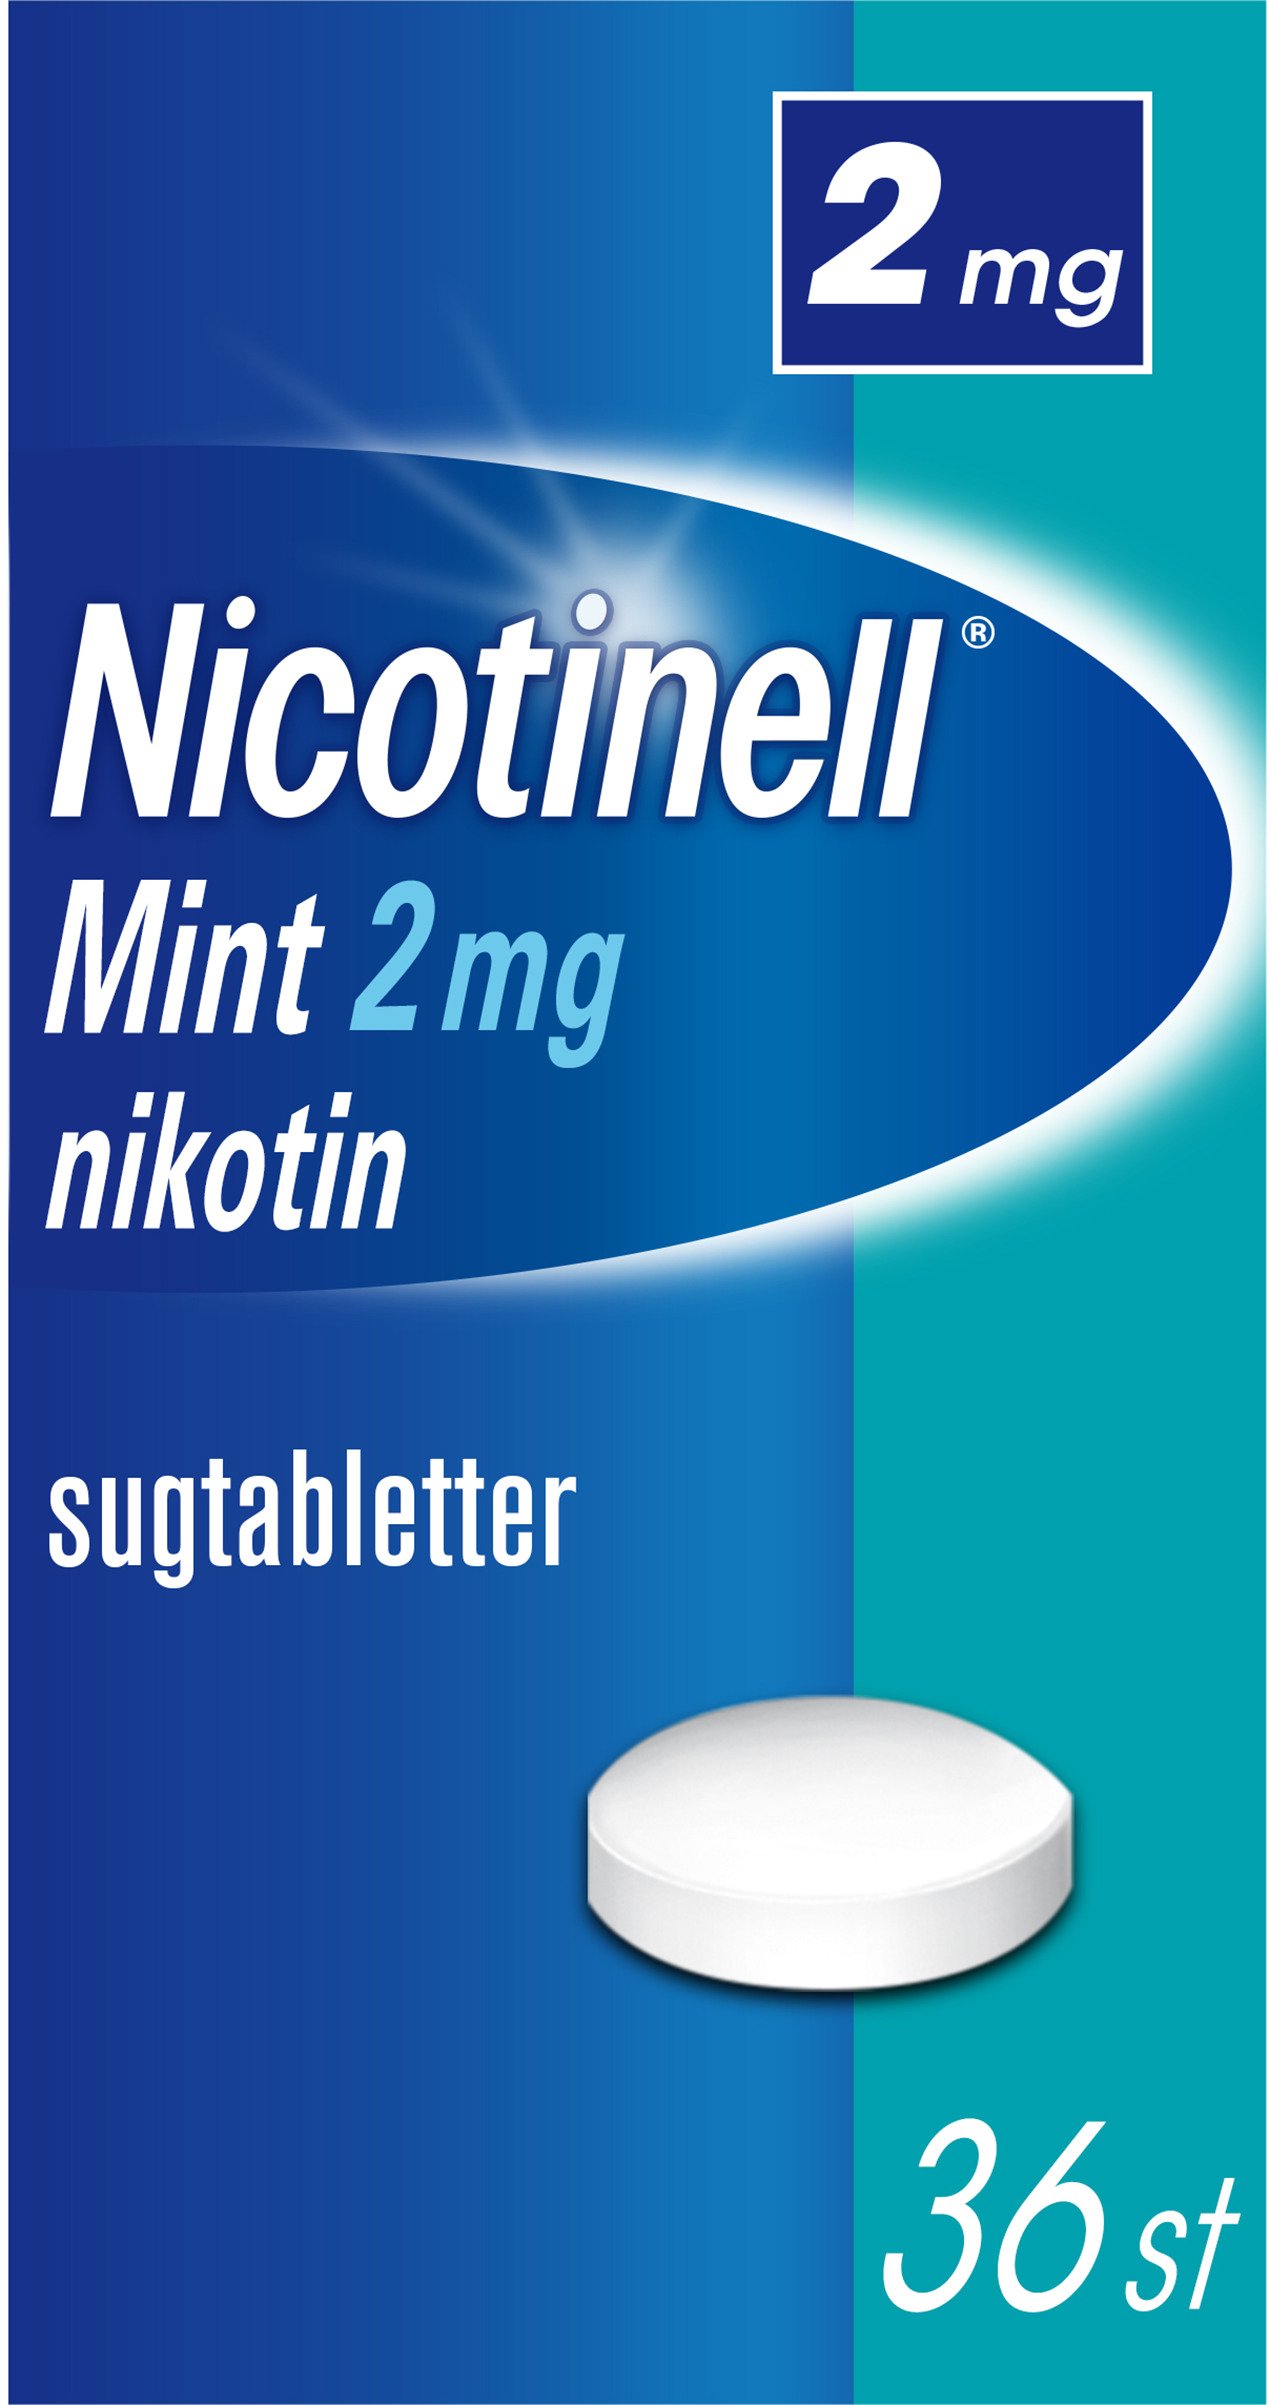 Nicotinell Mint 2 mg Komprimerade Sugtabletter 36 st